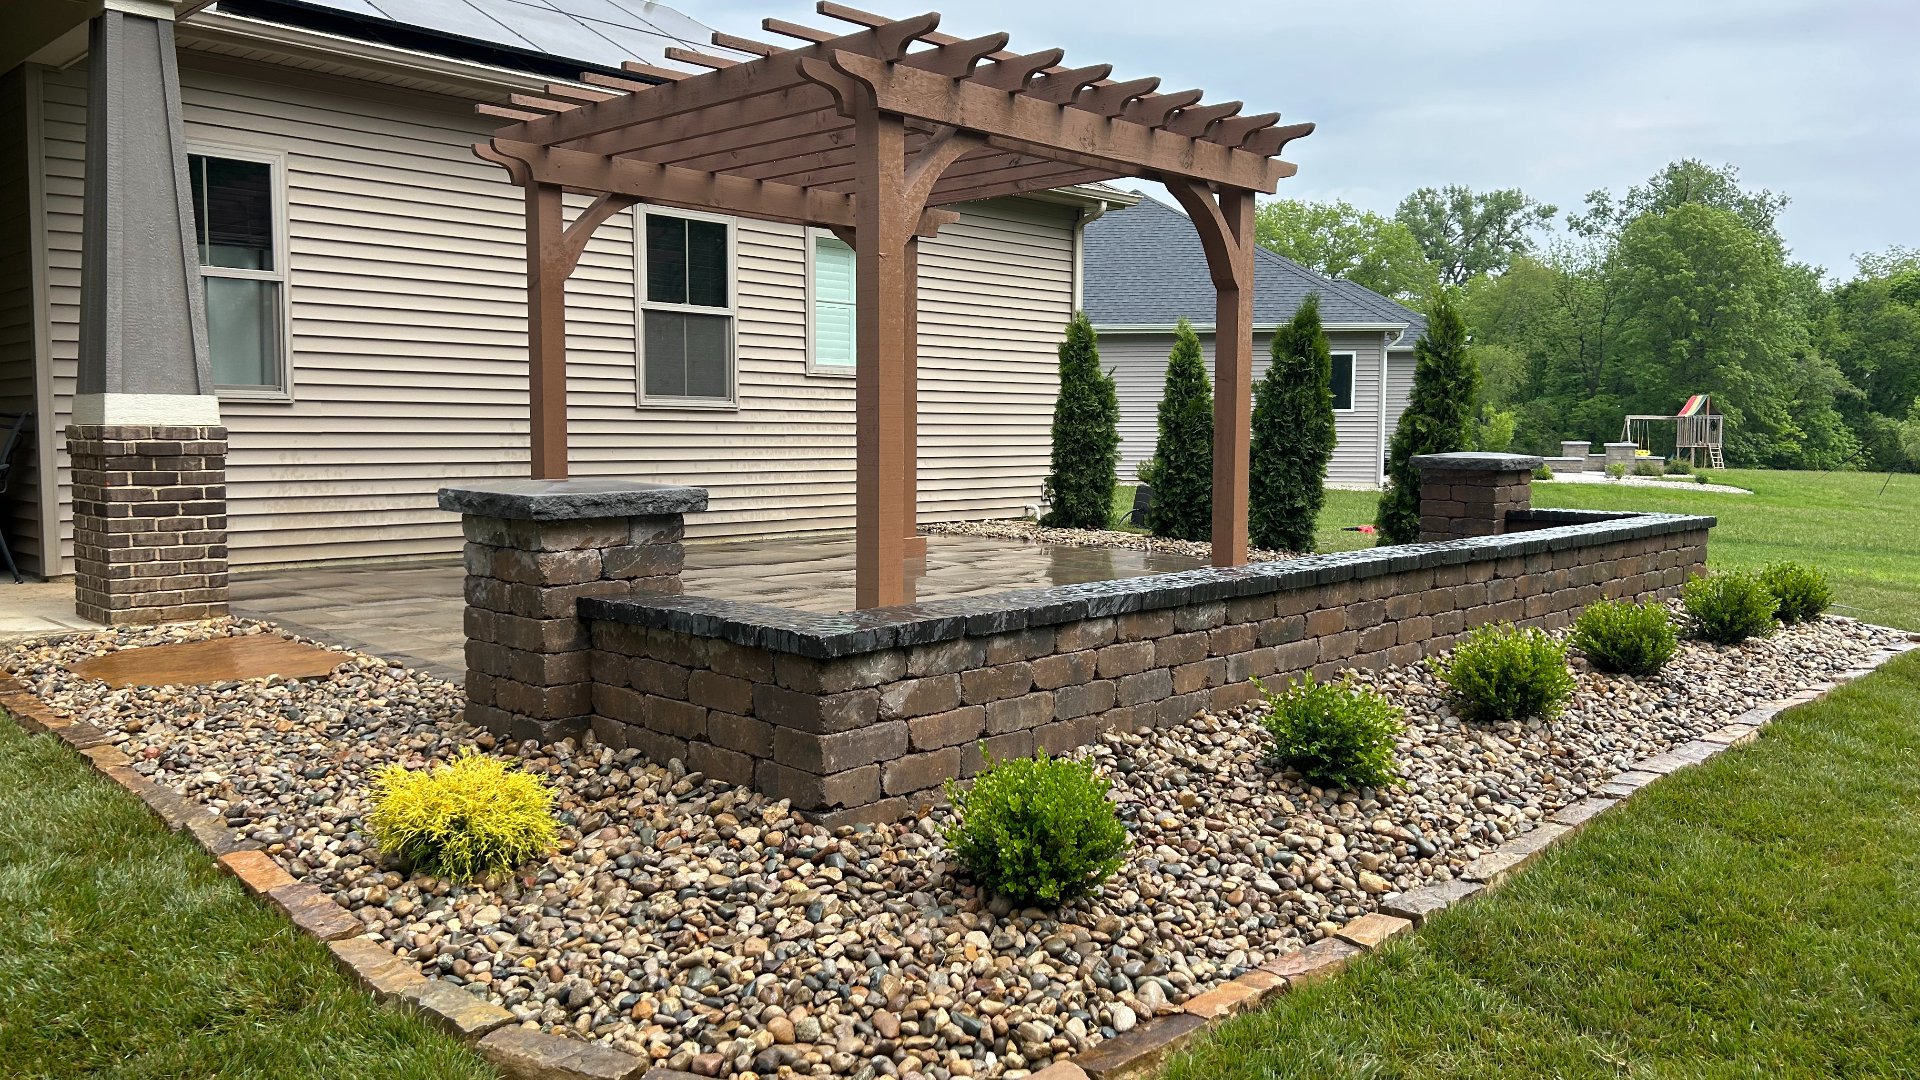 Outdoor Living Space Project in Troy, IL - Patio, Pergola, Retaining Wall & More